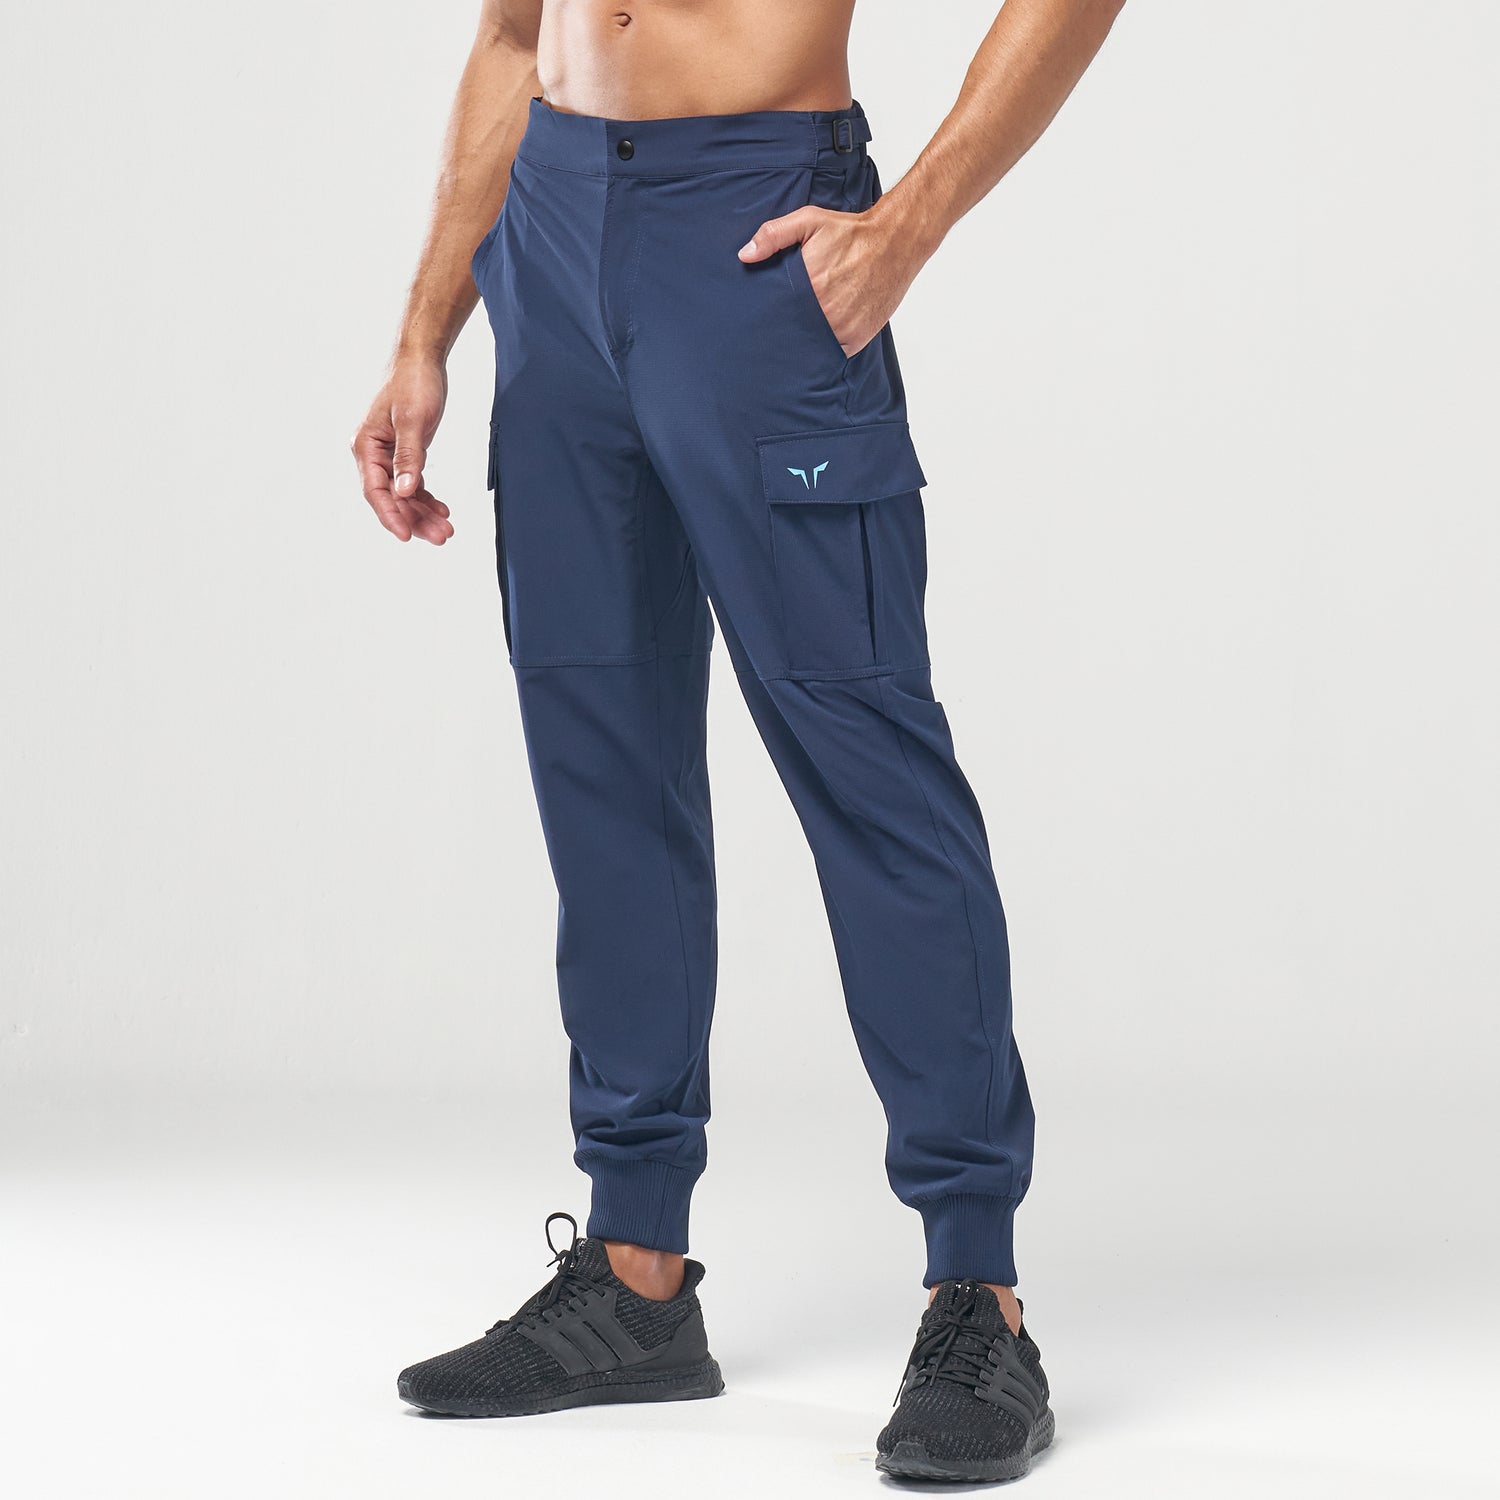 Mens Casual Zipper Joggers For Running, Sweat Fitness, Gym, And Outdoor  Streetwear 2020 Collection LJ201217 From Kong04, $11.39 | DHgate.Com